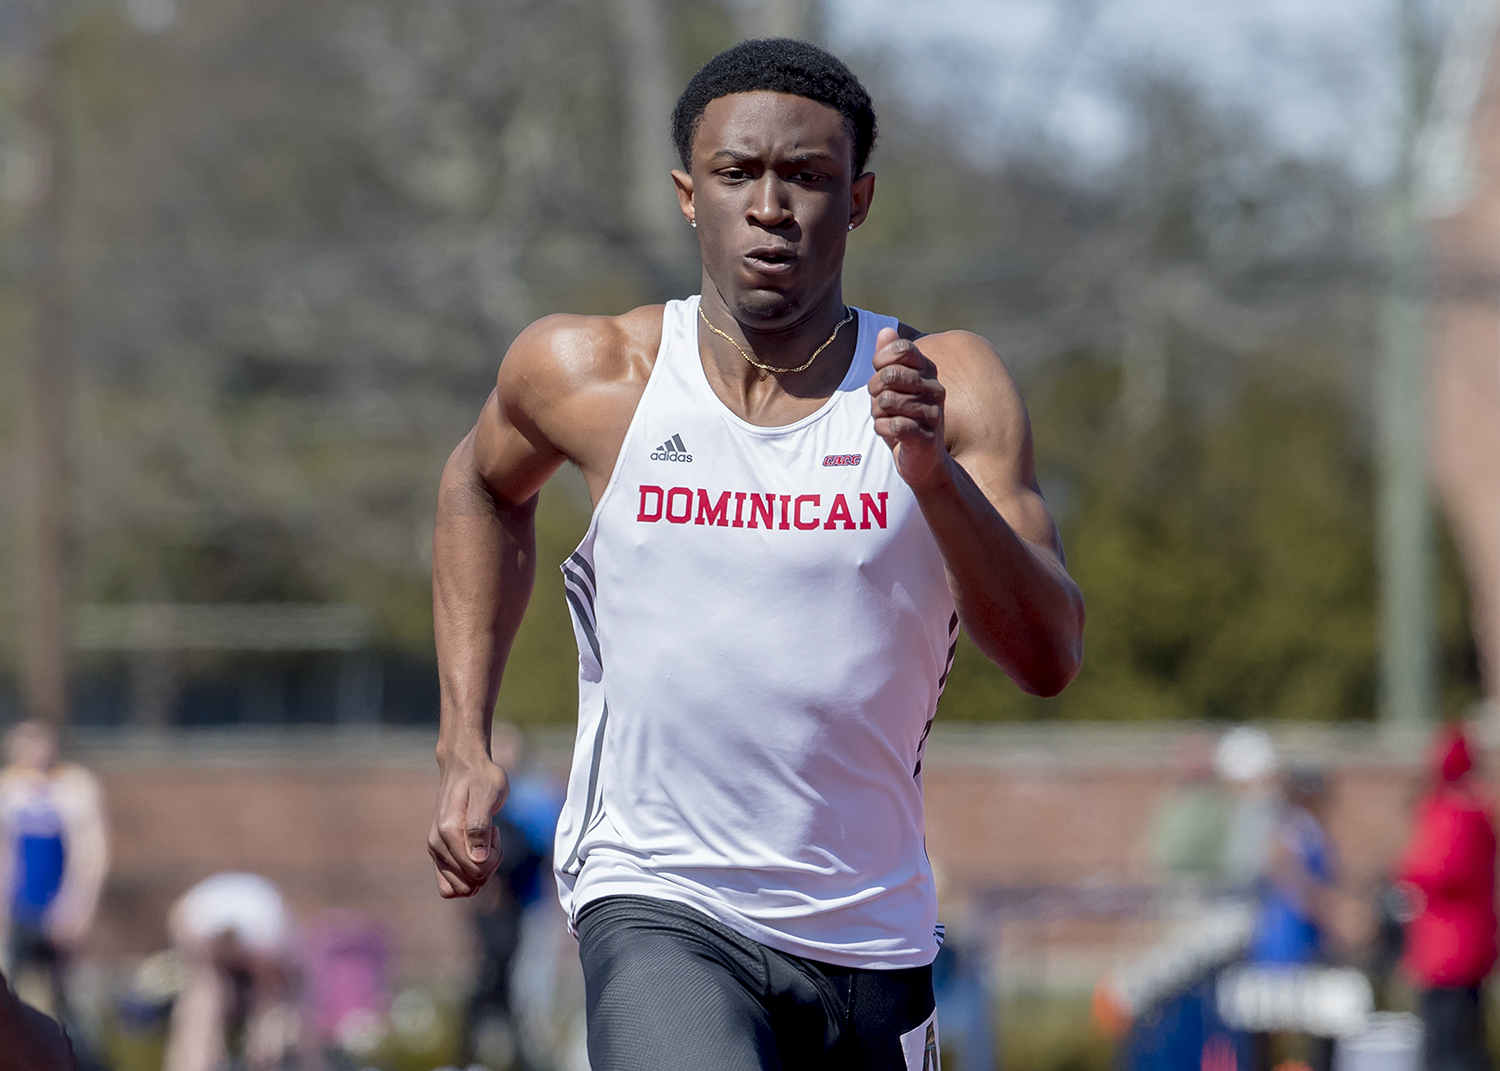 CHARGERS COMPETE AT QUEENSBOROUGH RELAYS